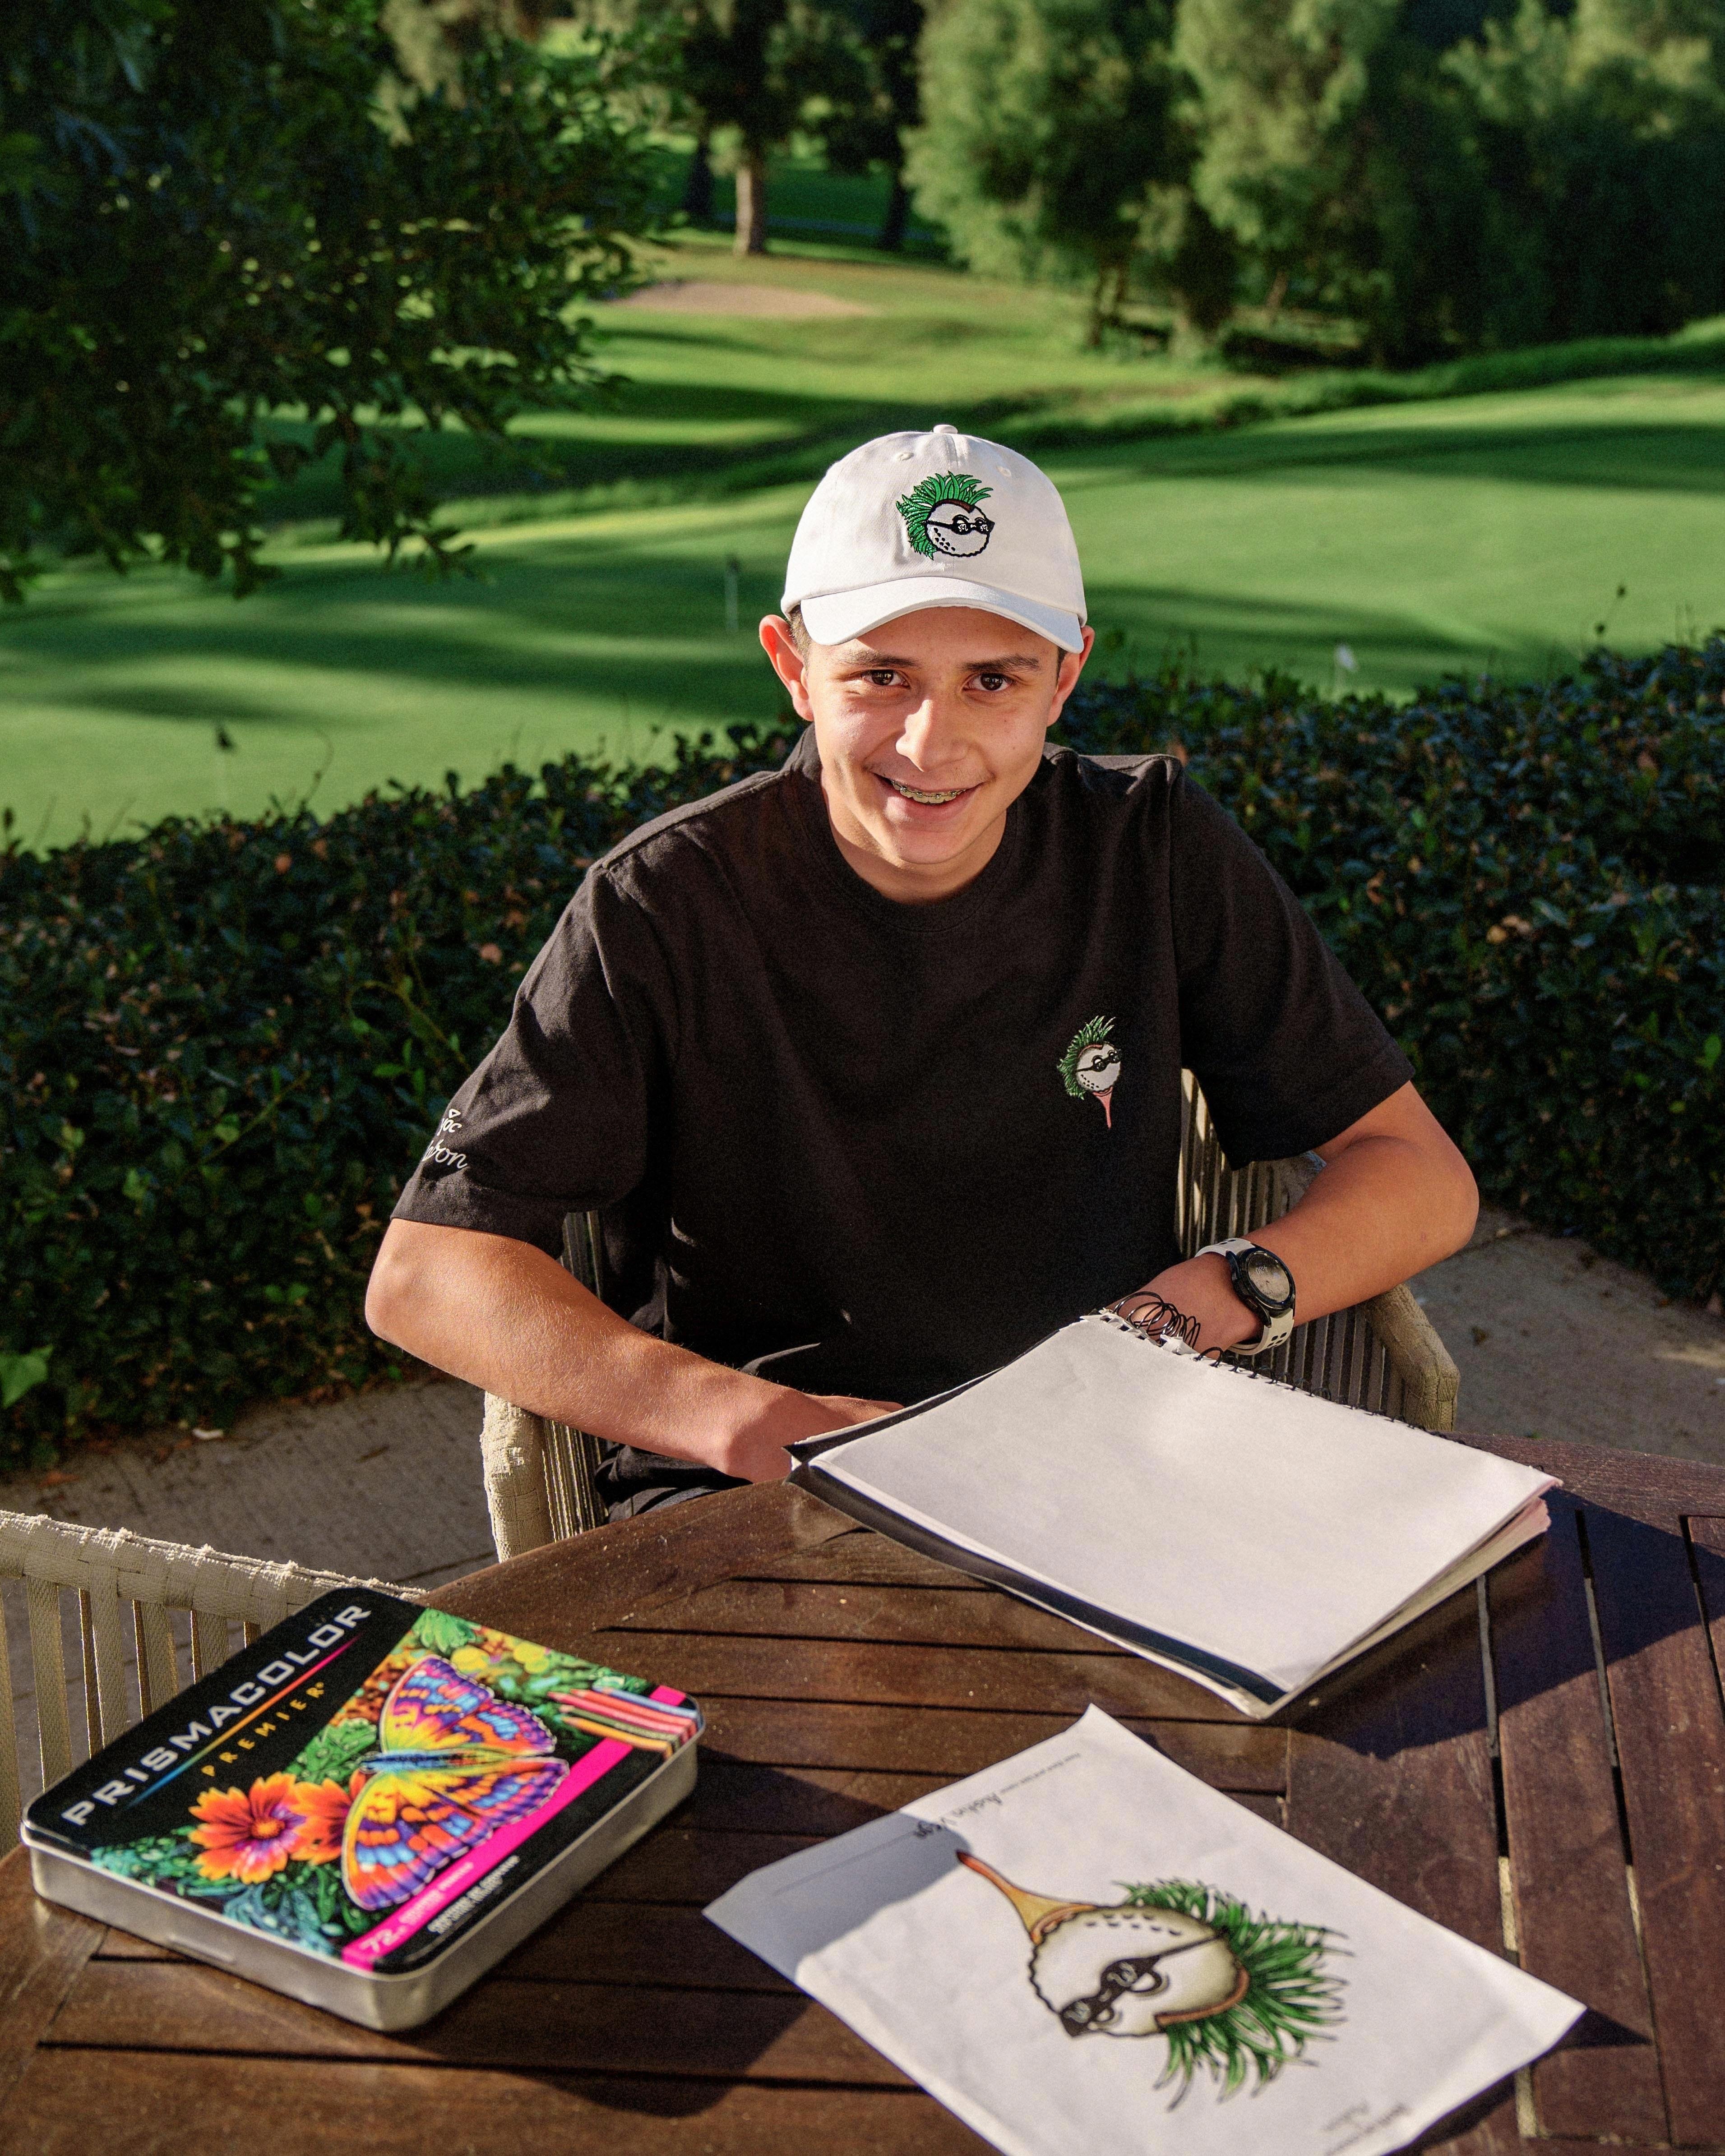 Malbon Golf Launches Merch Line Designed by Youth on Course Member